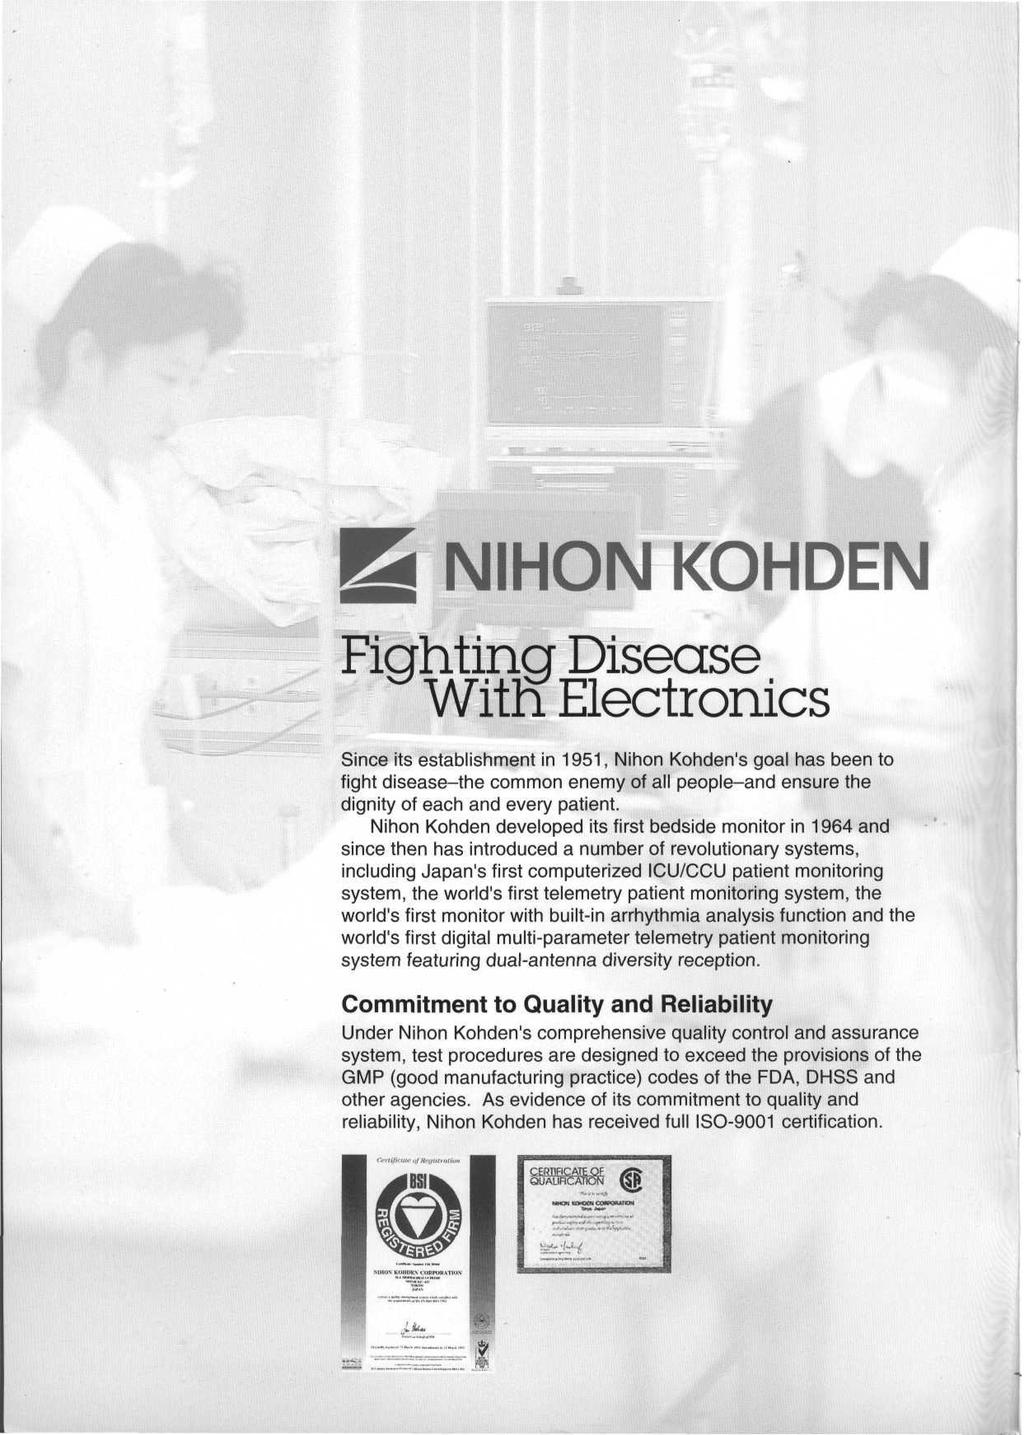 NIHON KOHDEN Fighting Disease Witn Electronics Since its establishment in 1951, Nihon Kohden's goal has been to fight disease-the common enemy of all people-and ensure the dignity of each and every